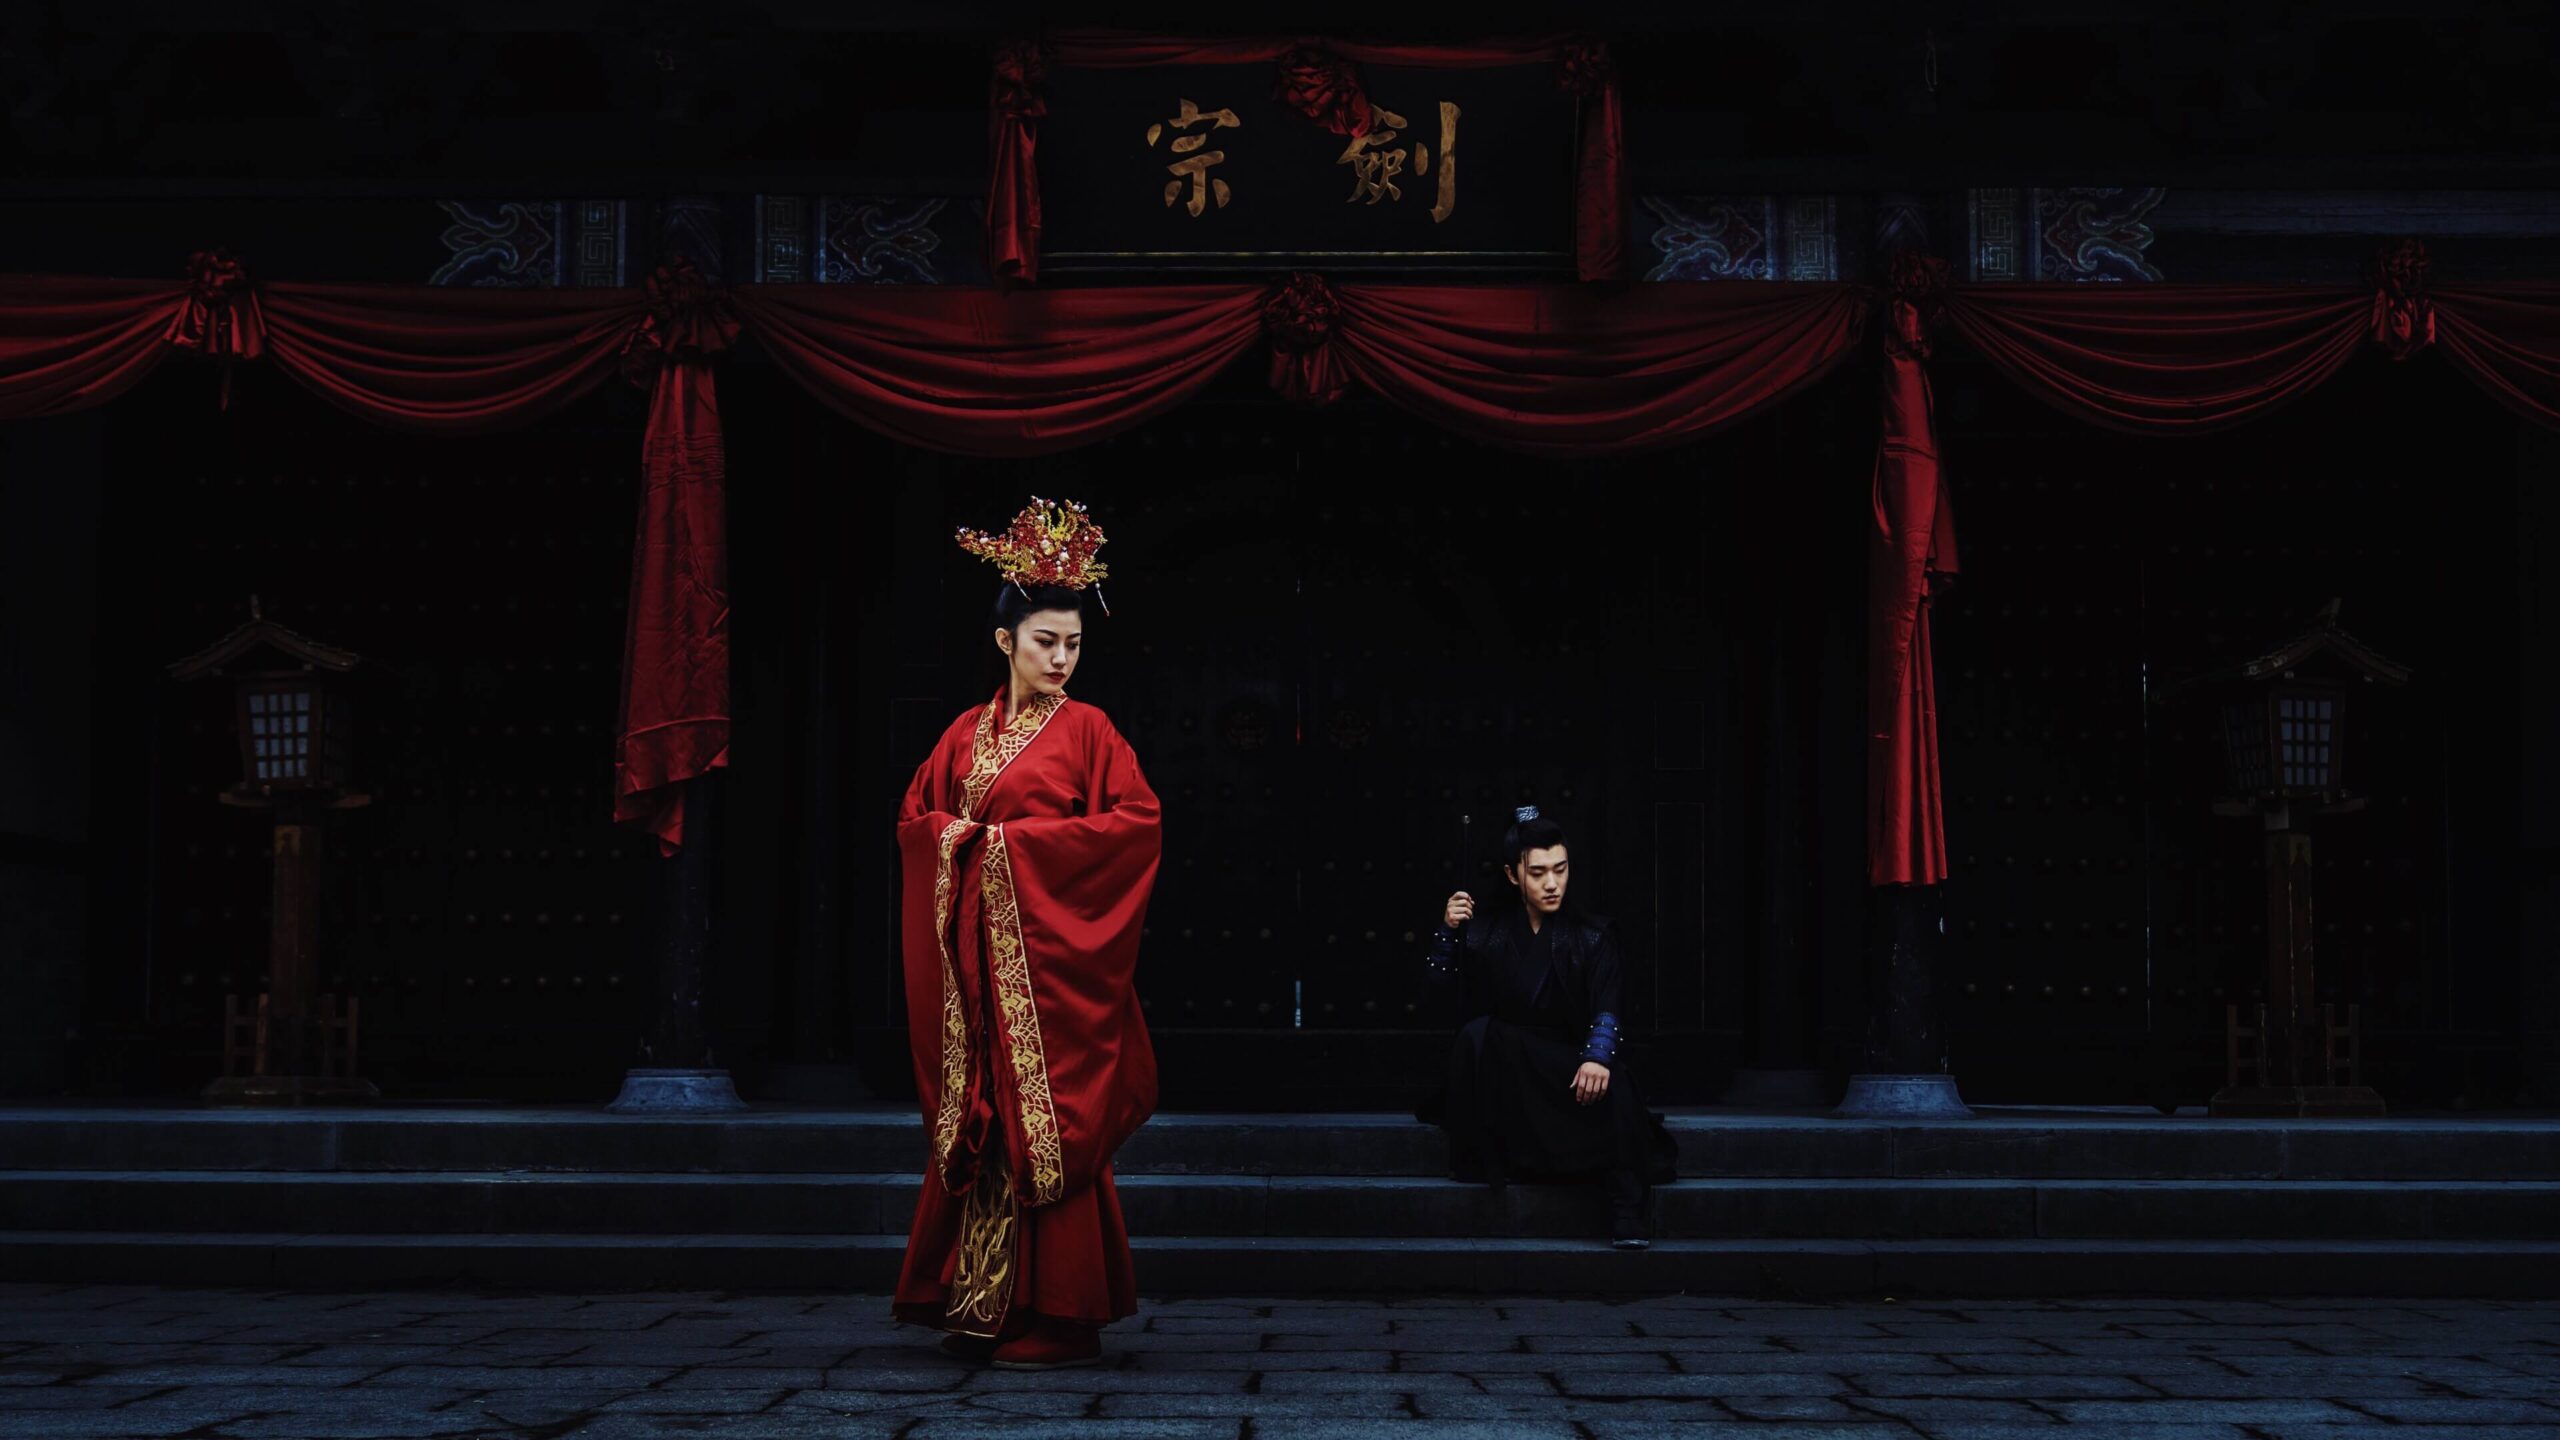 A woman in a red traditional Chinese dress stands in front of stairs in a courtyard. There is a man sitting on the steps wearing a black traditional Chinese tunic.